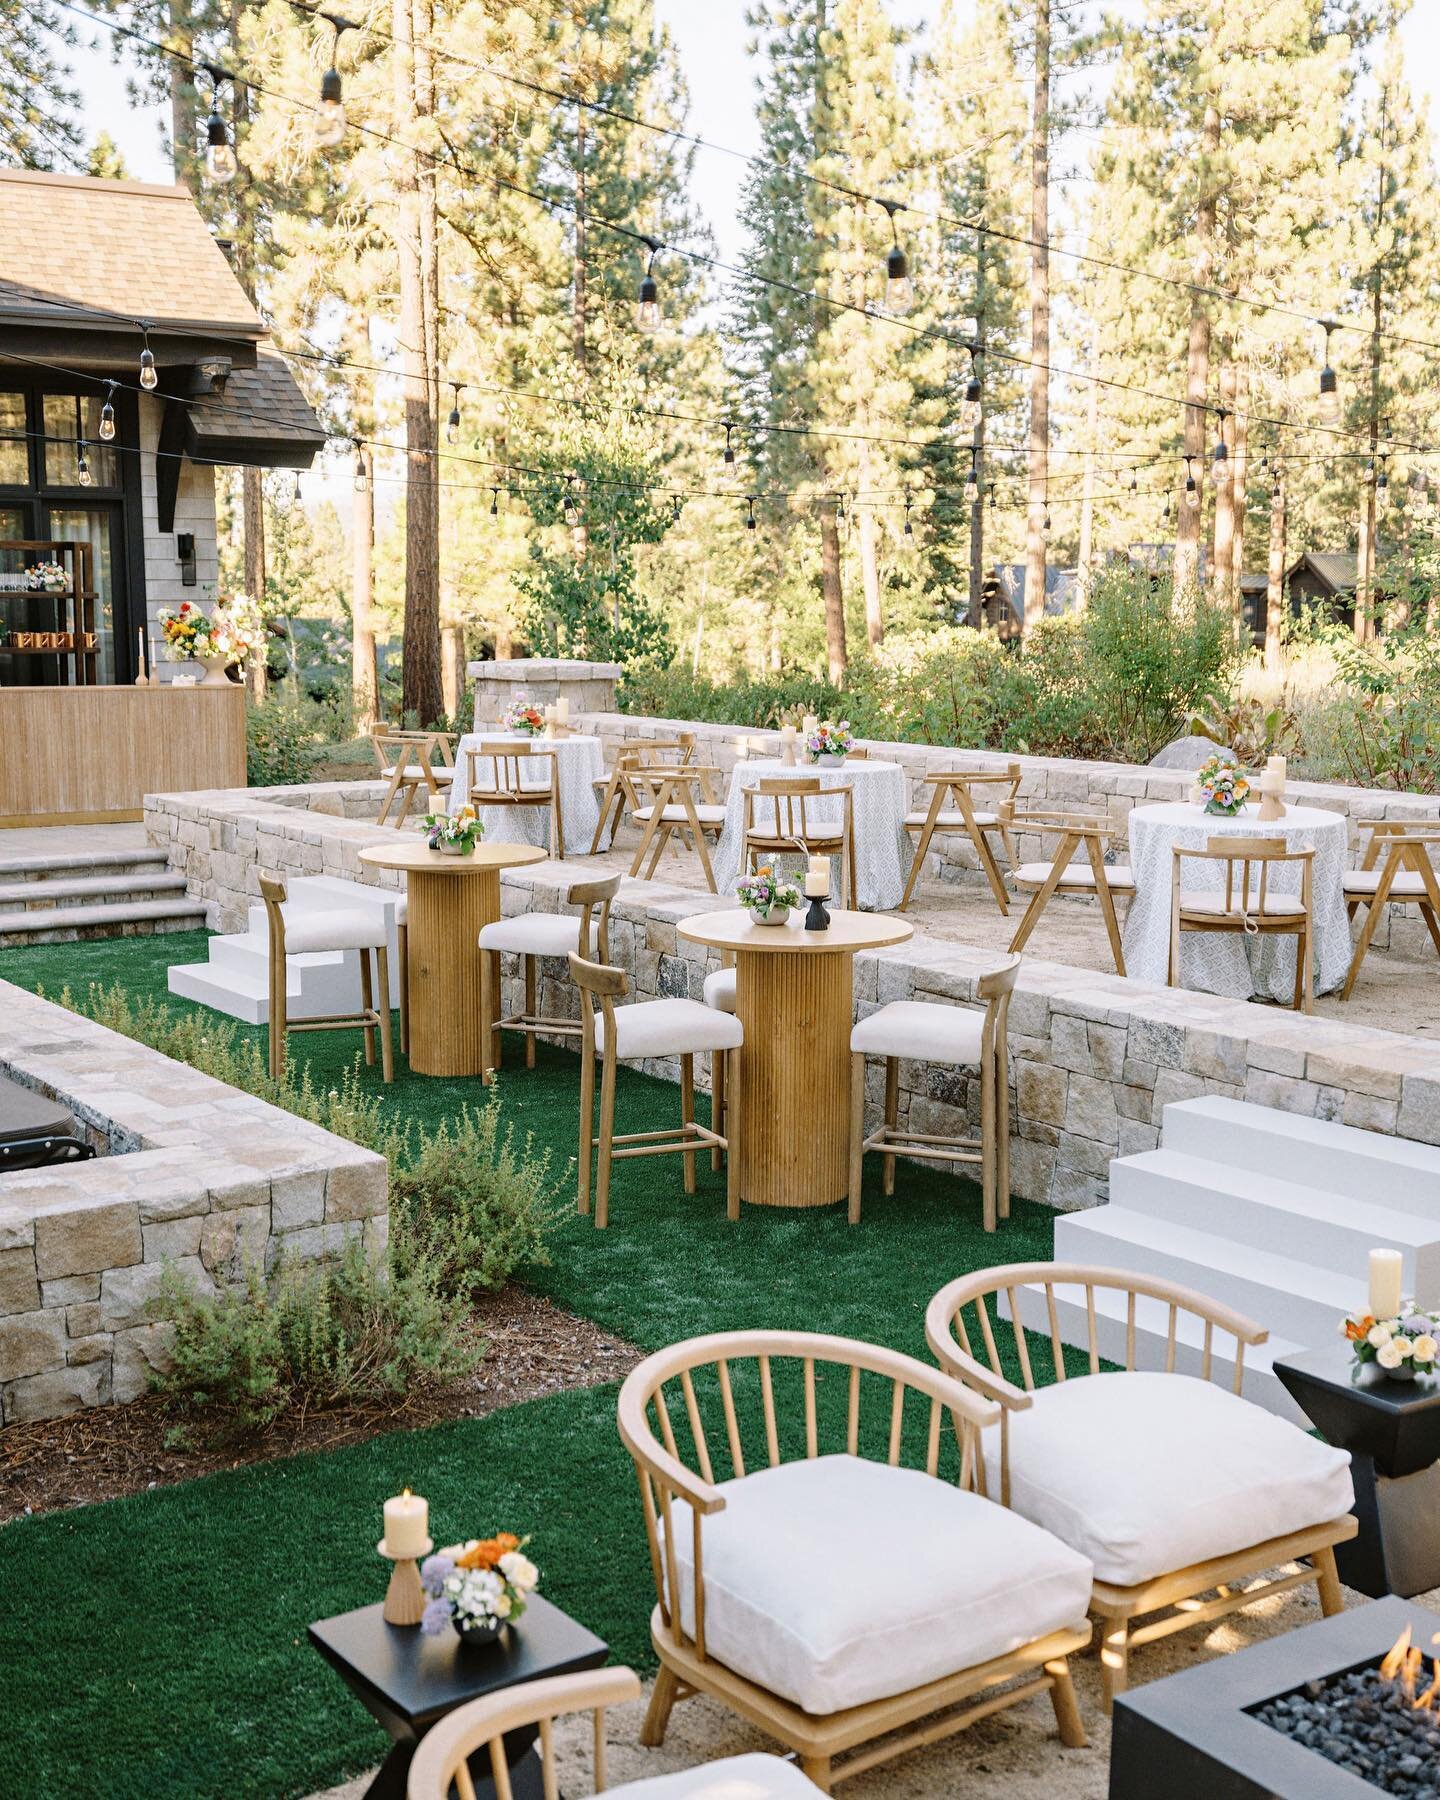 Welcomed Hayley + Will&rsquo;s guests with a kick-off party at their Tahoe family home!

C R E A T I V E  T E A M
PHOTOGRAPHY | @imryanray 
PLANNING + DESIGN | @eliseevents 
FLORAL + DESIGN | @mindyricedesign 
EVENT BRANDING | @theideaemporium 
CATER